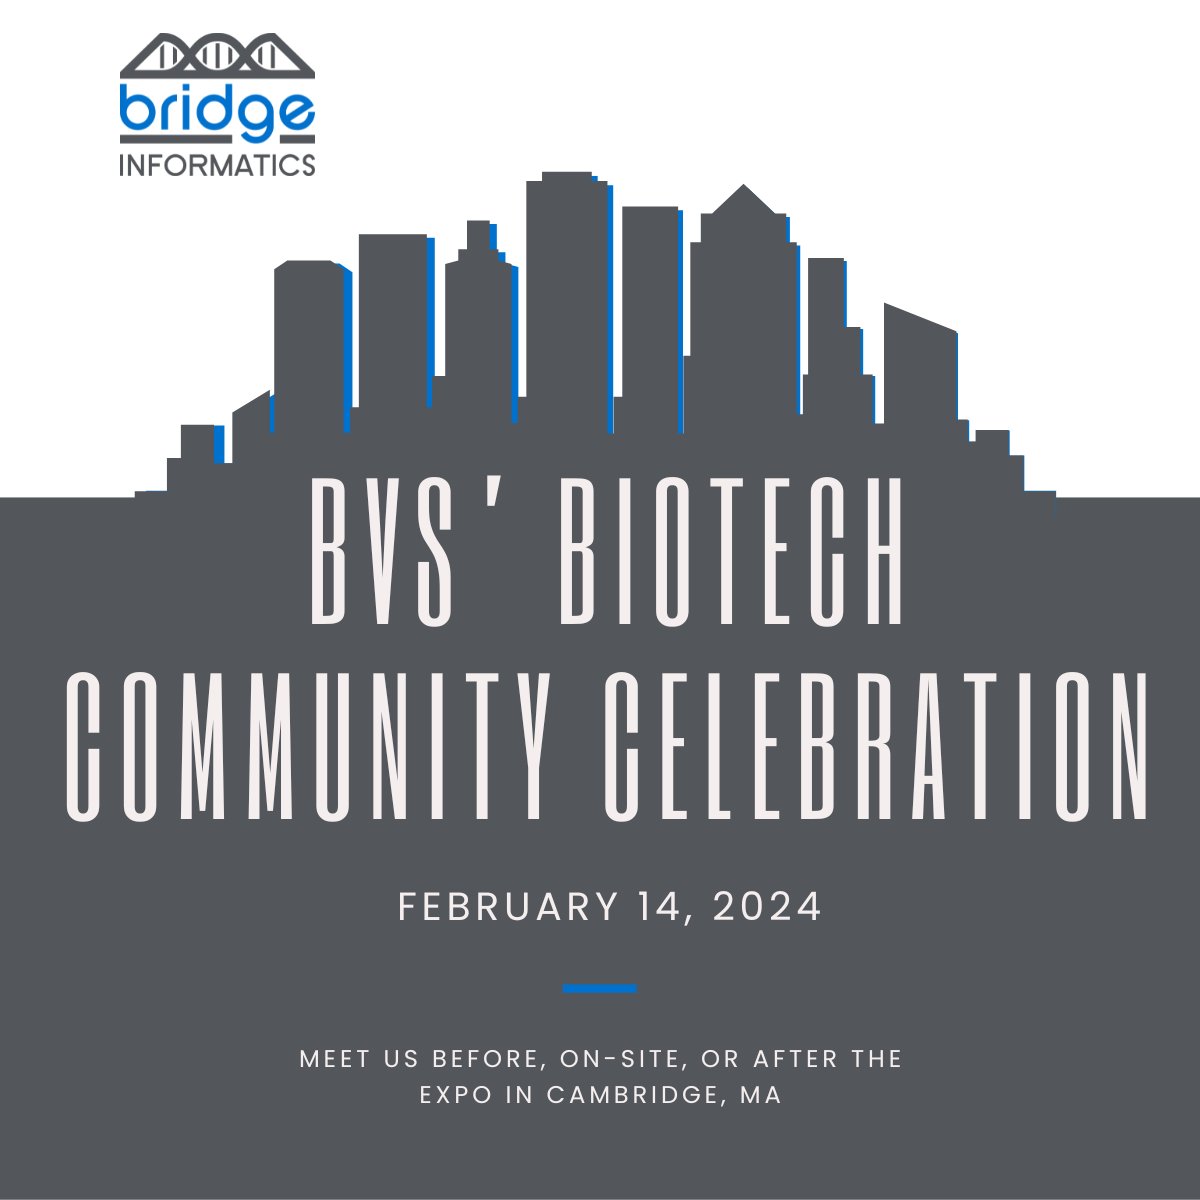 TODAY: Meet BI's Founder & CEO, Dan Ryder, between 11:00 AM and 1:30 PM at BVS' Biotech Community Celebration!